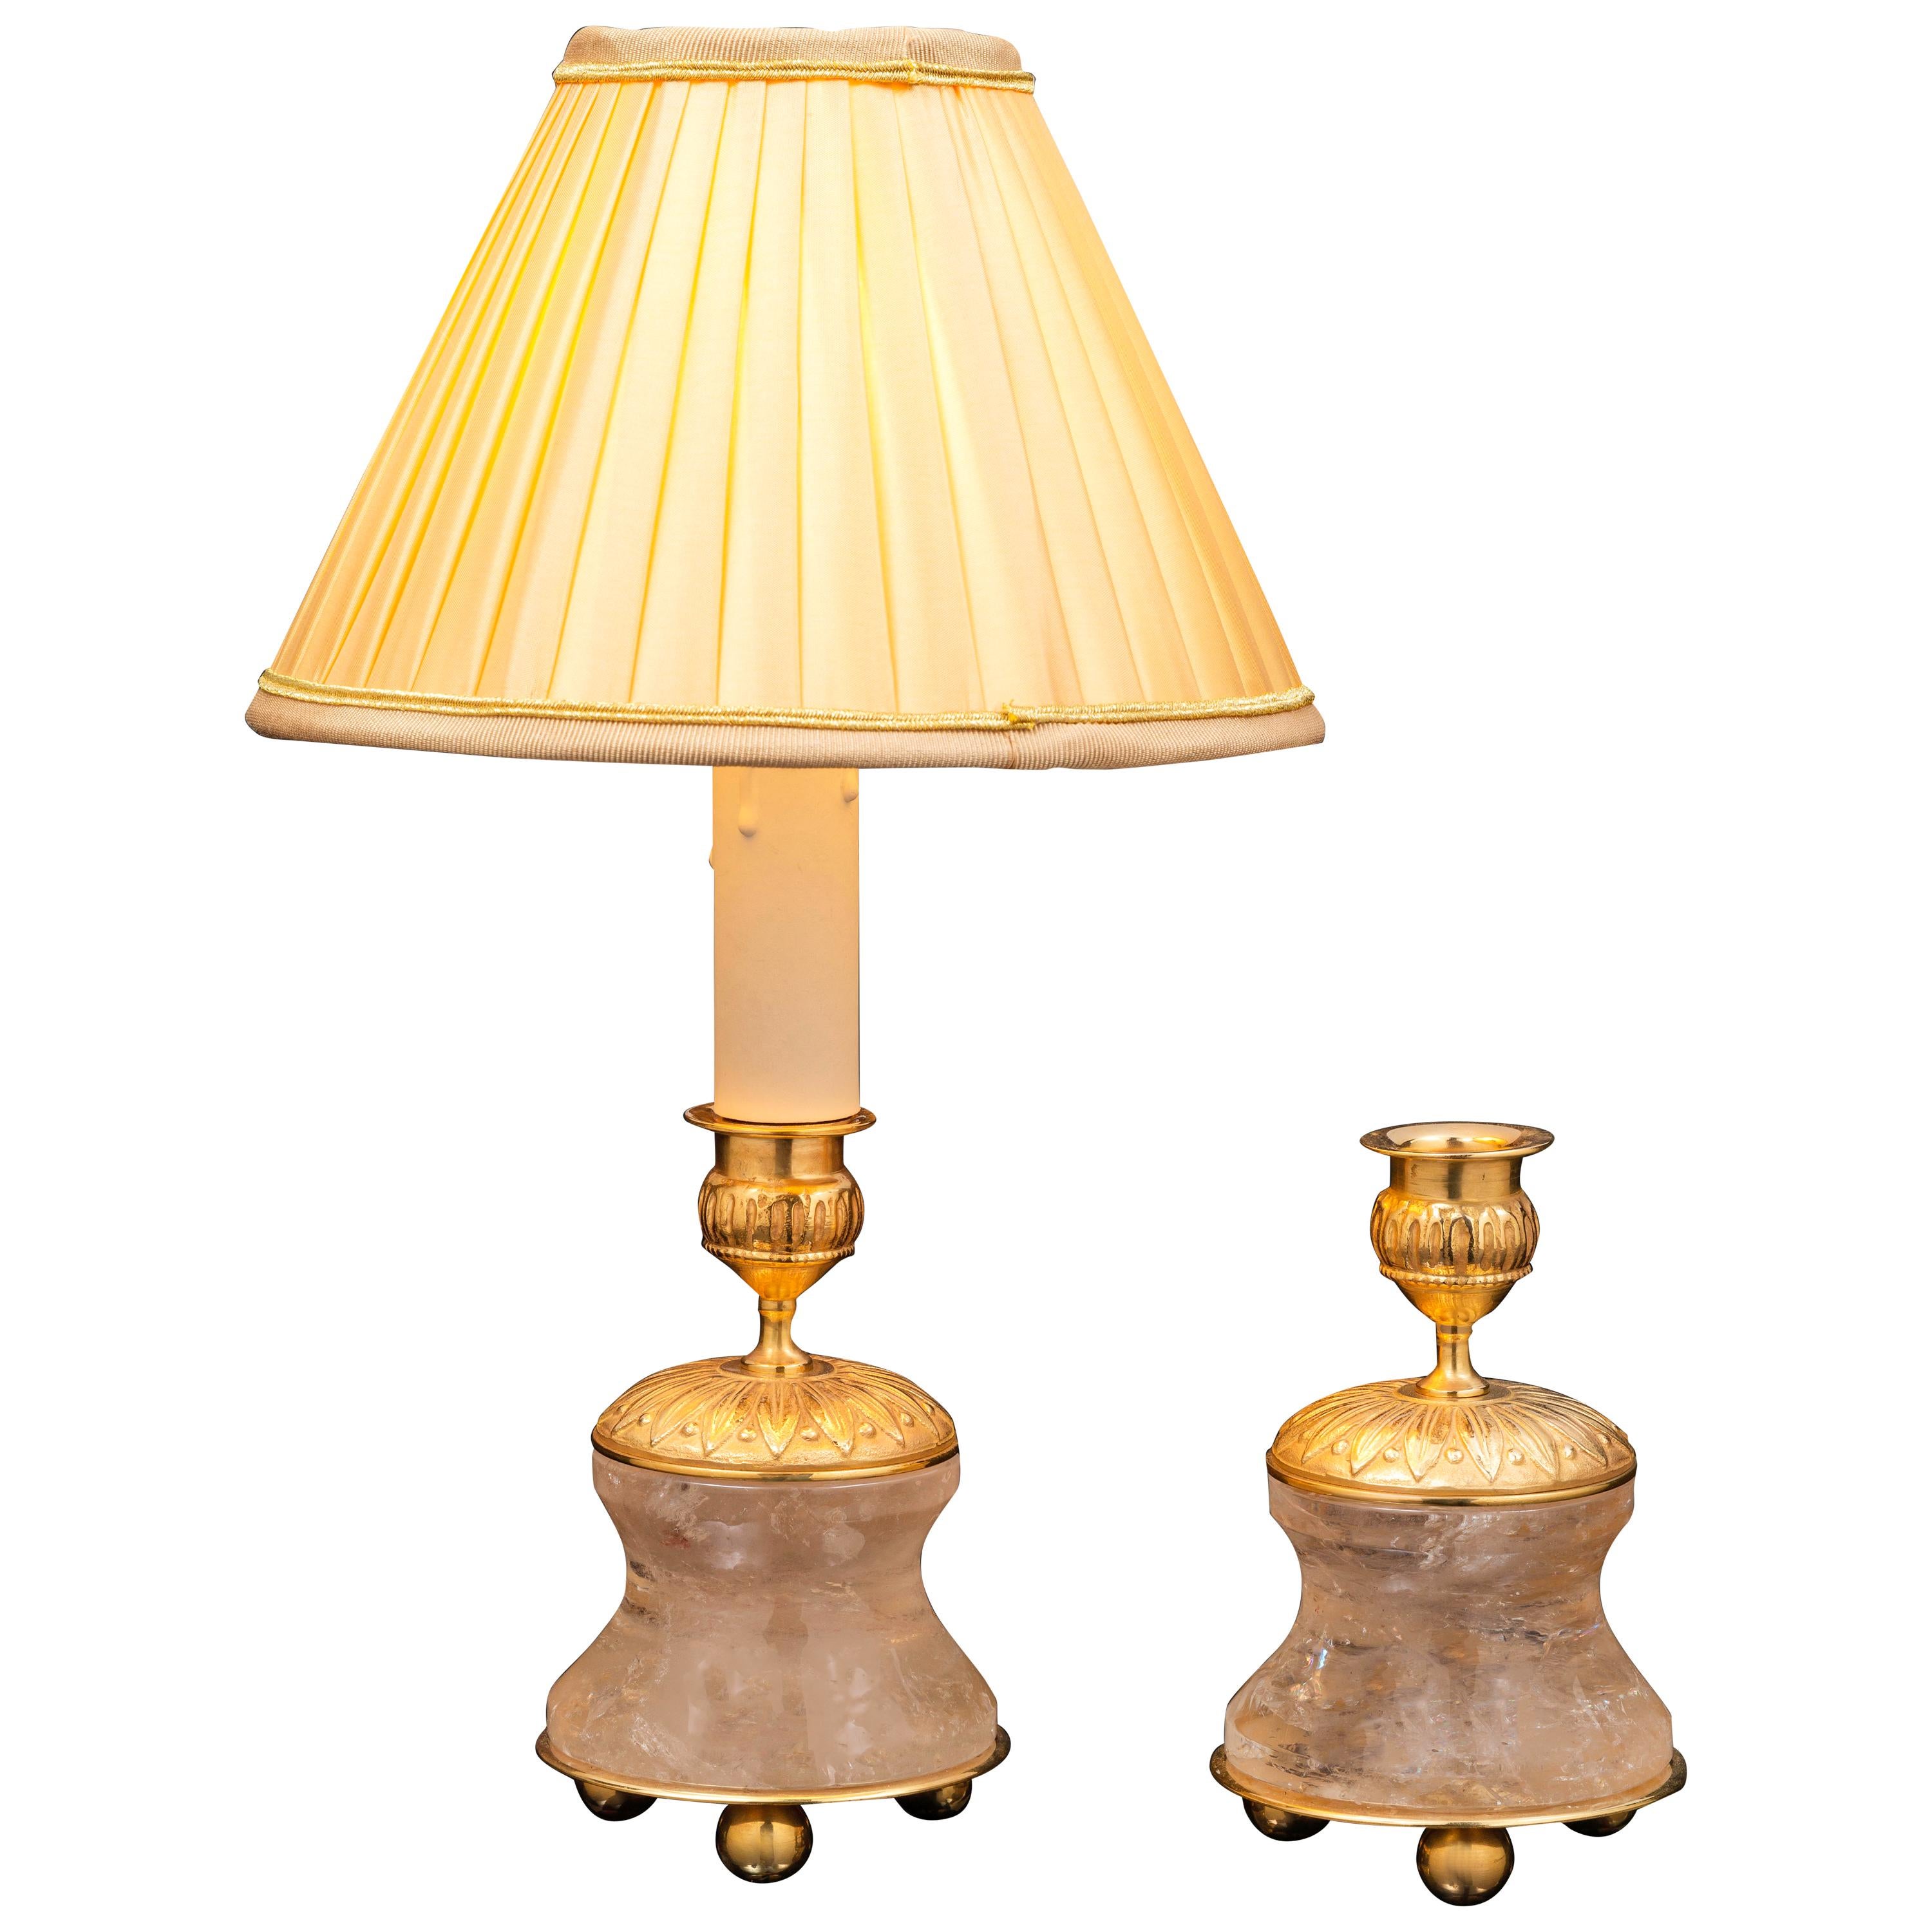 Pair of Rock Crystal and Gilt Bronze Lamps / Candlesticks Louis XVI Style